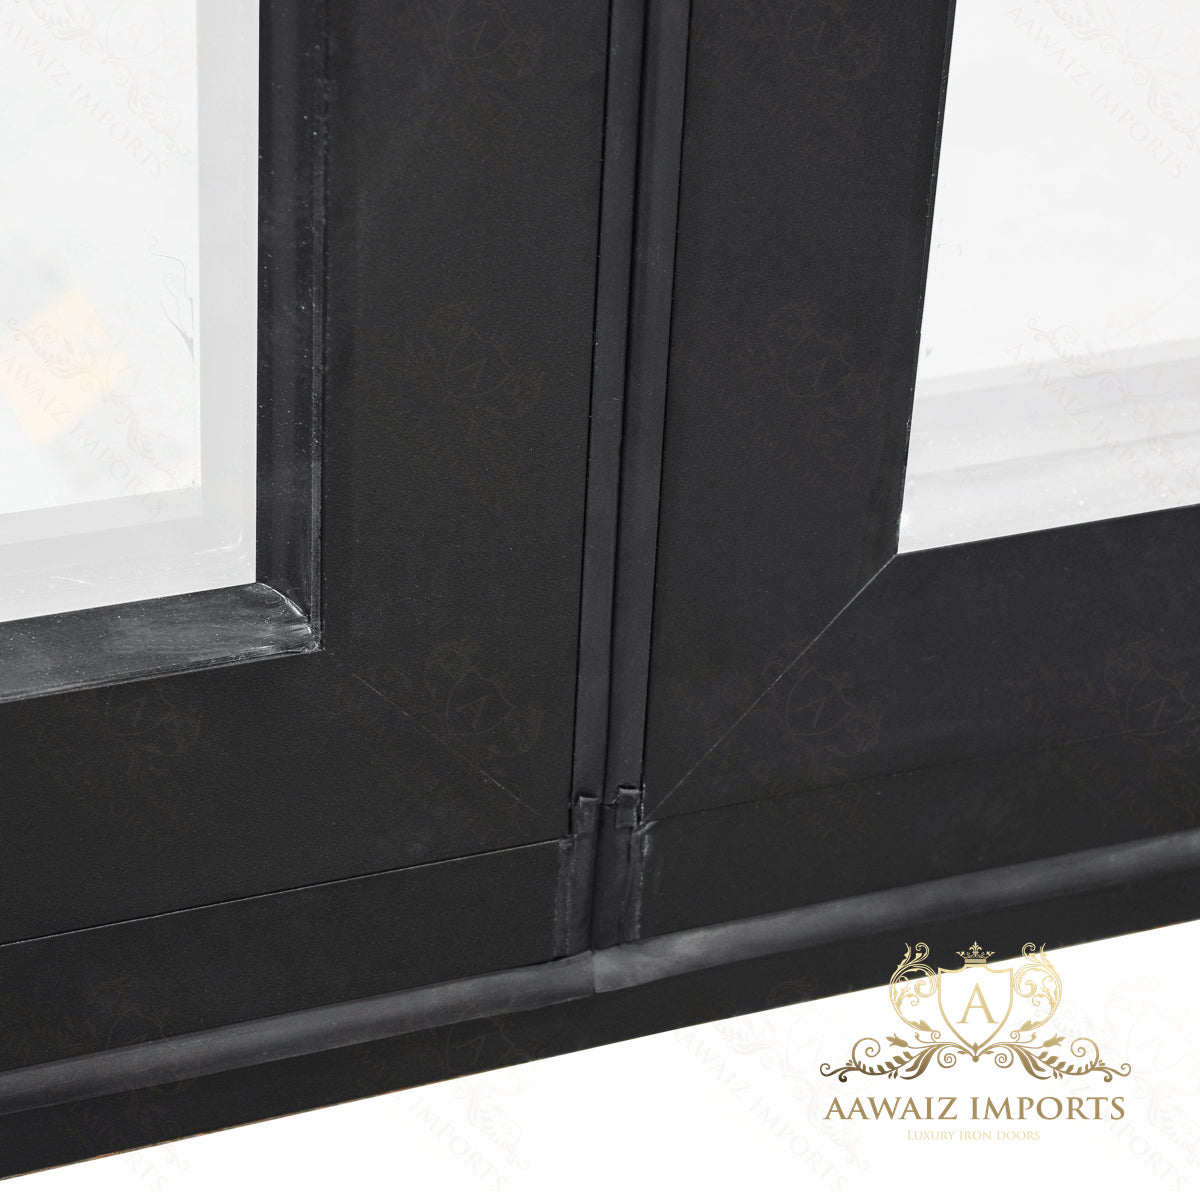 12 Ft Wide By 8 Ft Tall (144" By 96") Aluminum Bi Fold Patio Door  Outswing  Thermal Break Insulated Matt Black Finish